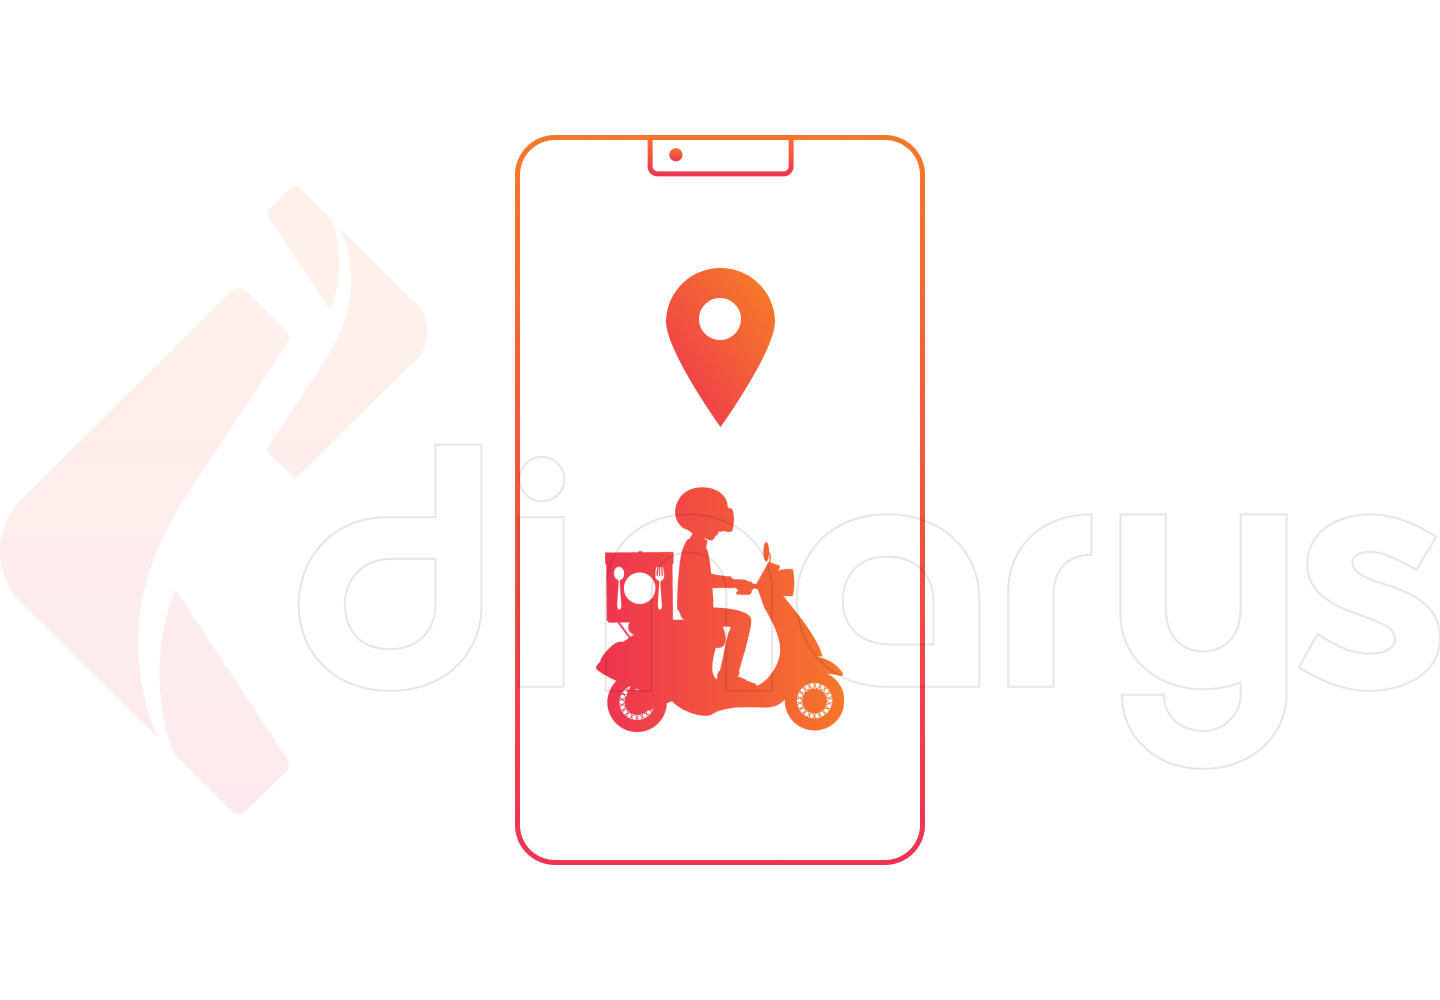 Delivery tracking software